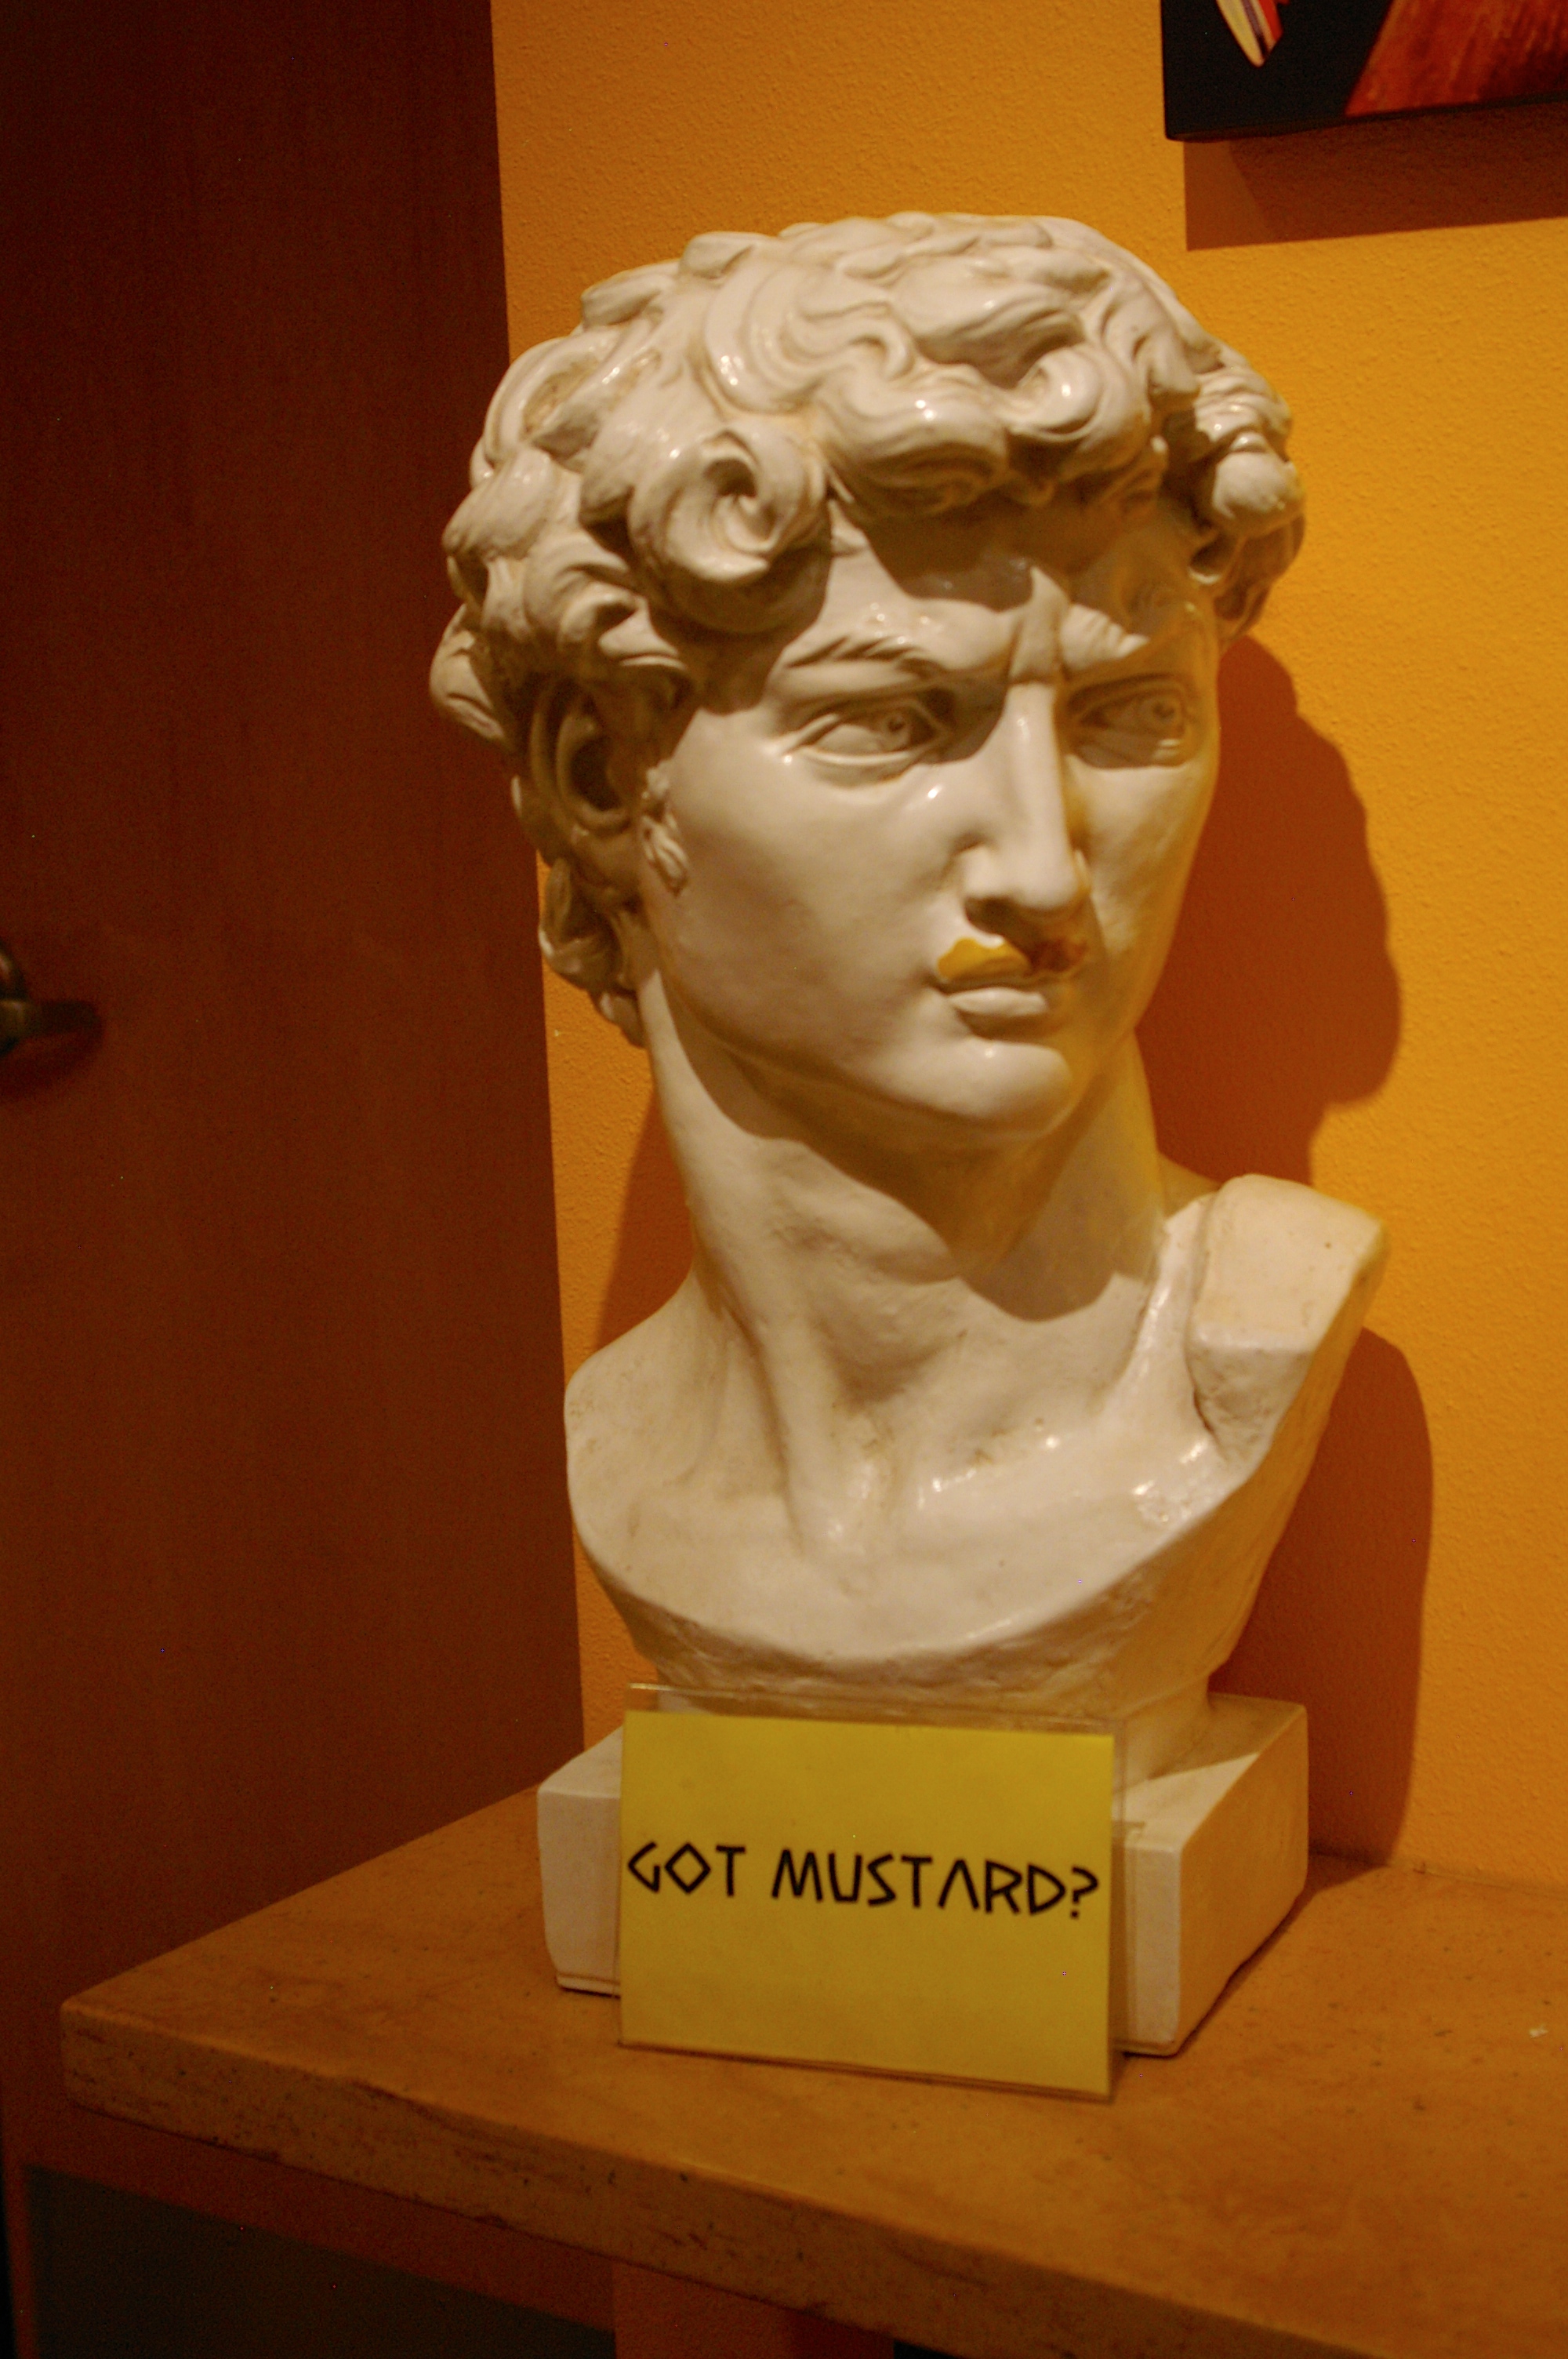 Classic bust with mustard mustache that says "Got mustard?" at the National Mustard Museum near Madison, Wisconsin